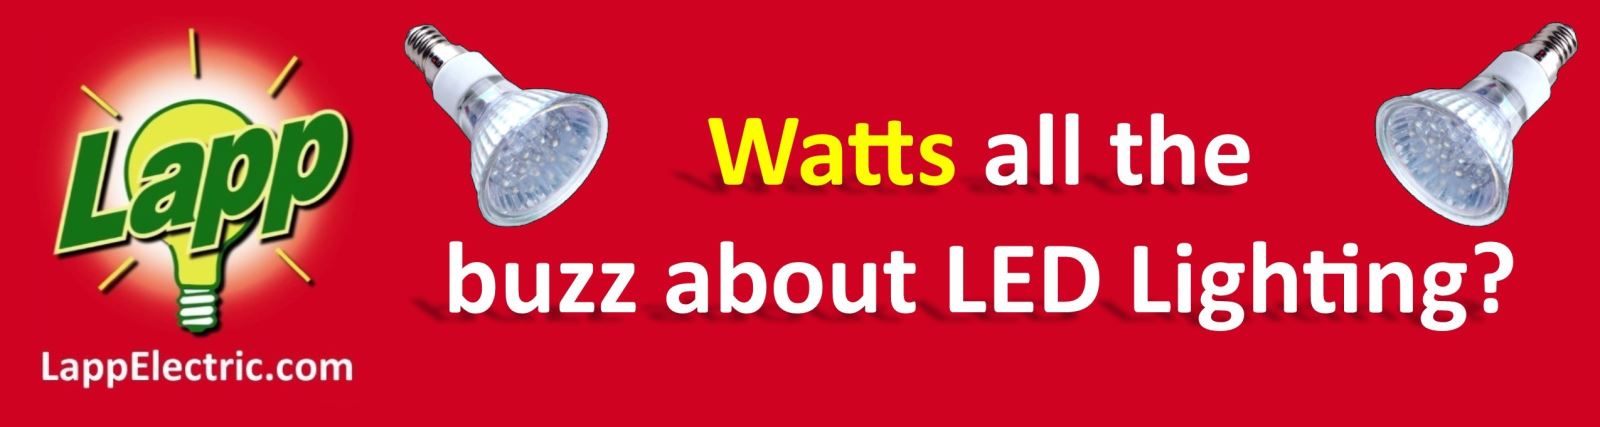 Watts all the buzz about LED LIghting?